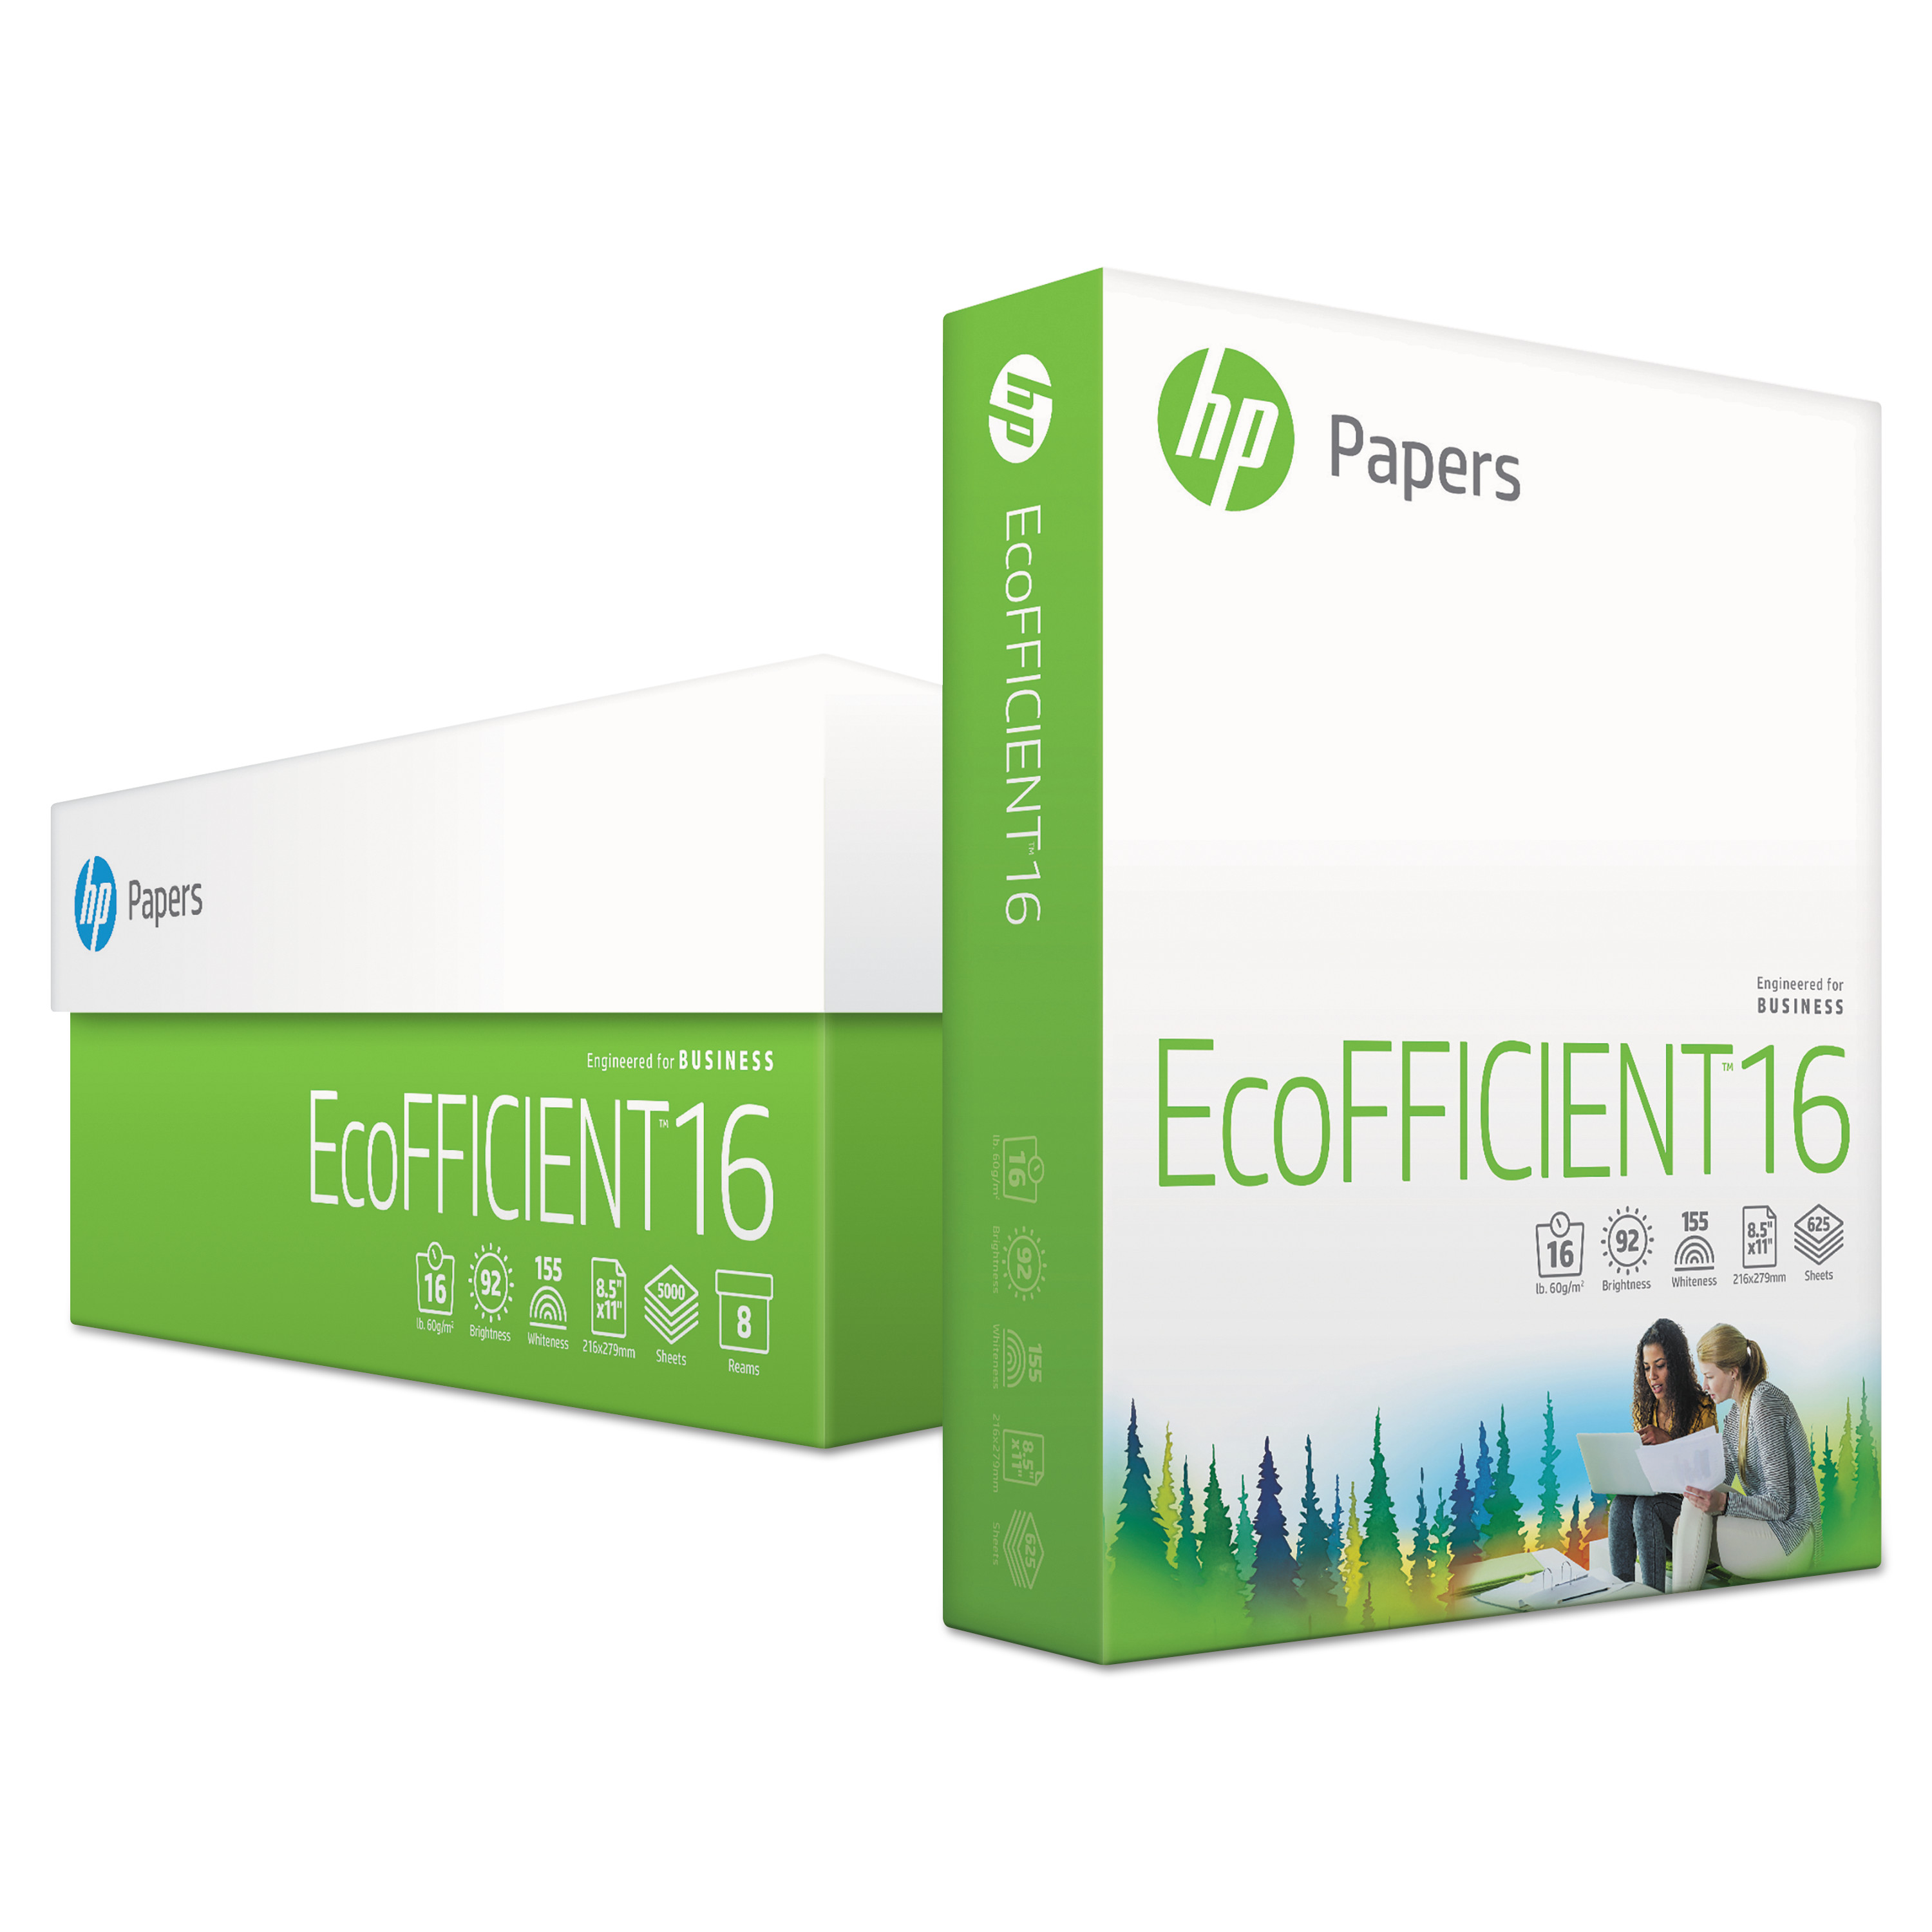  HP Papers 216000 EcoFFICIENT16 Paper, 92 Bright, 16lb, 8.5 x 11, White, 625 Sheets/Ream, 8 Reams/Carton (HEW216000) 